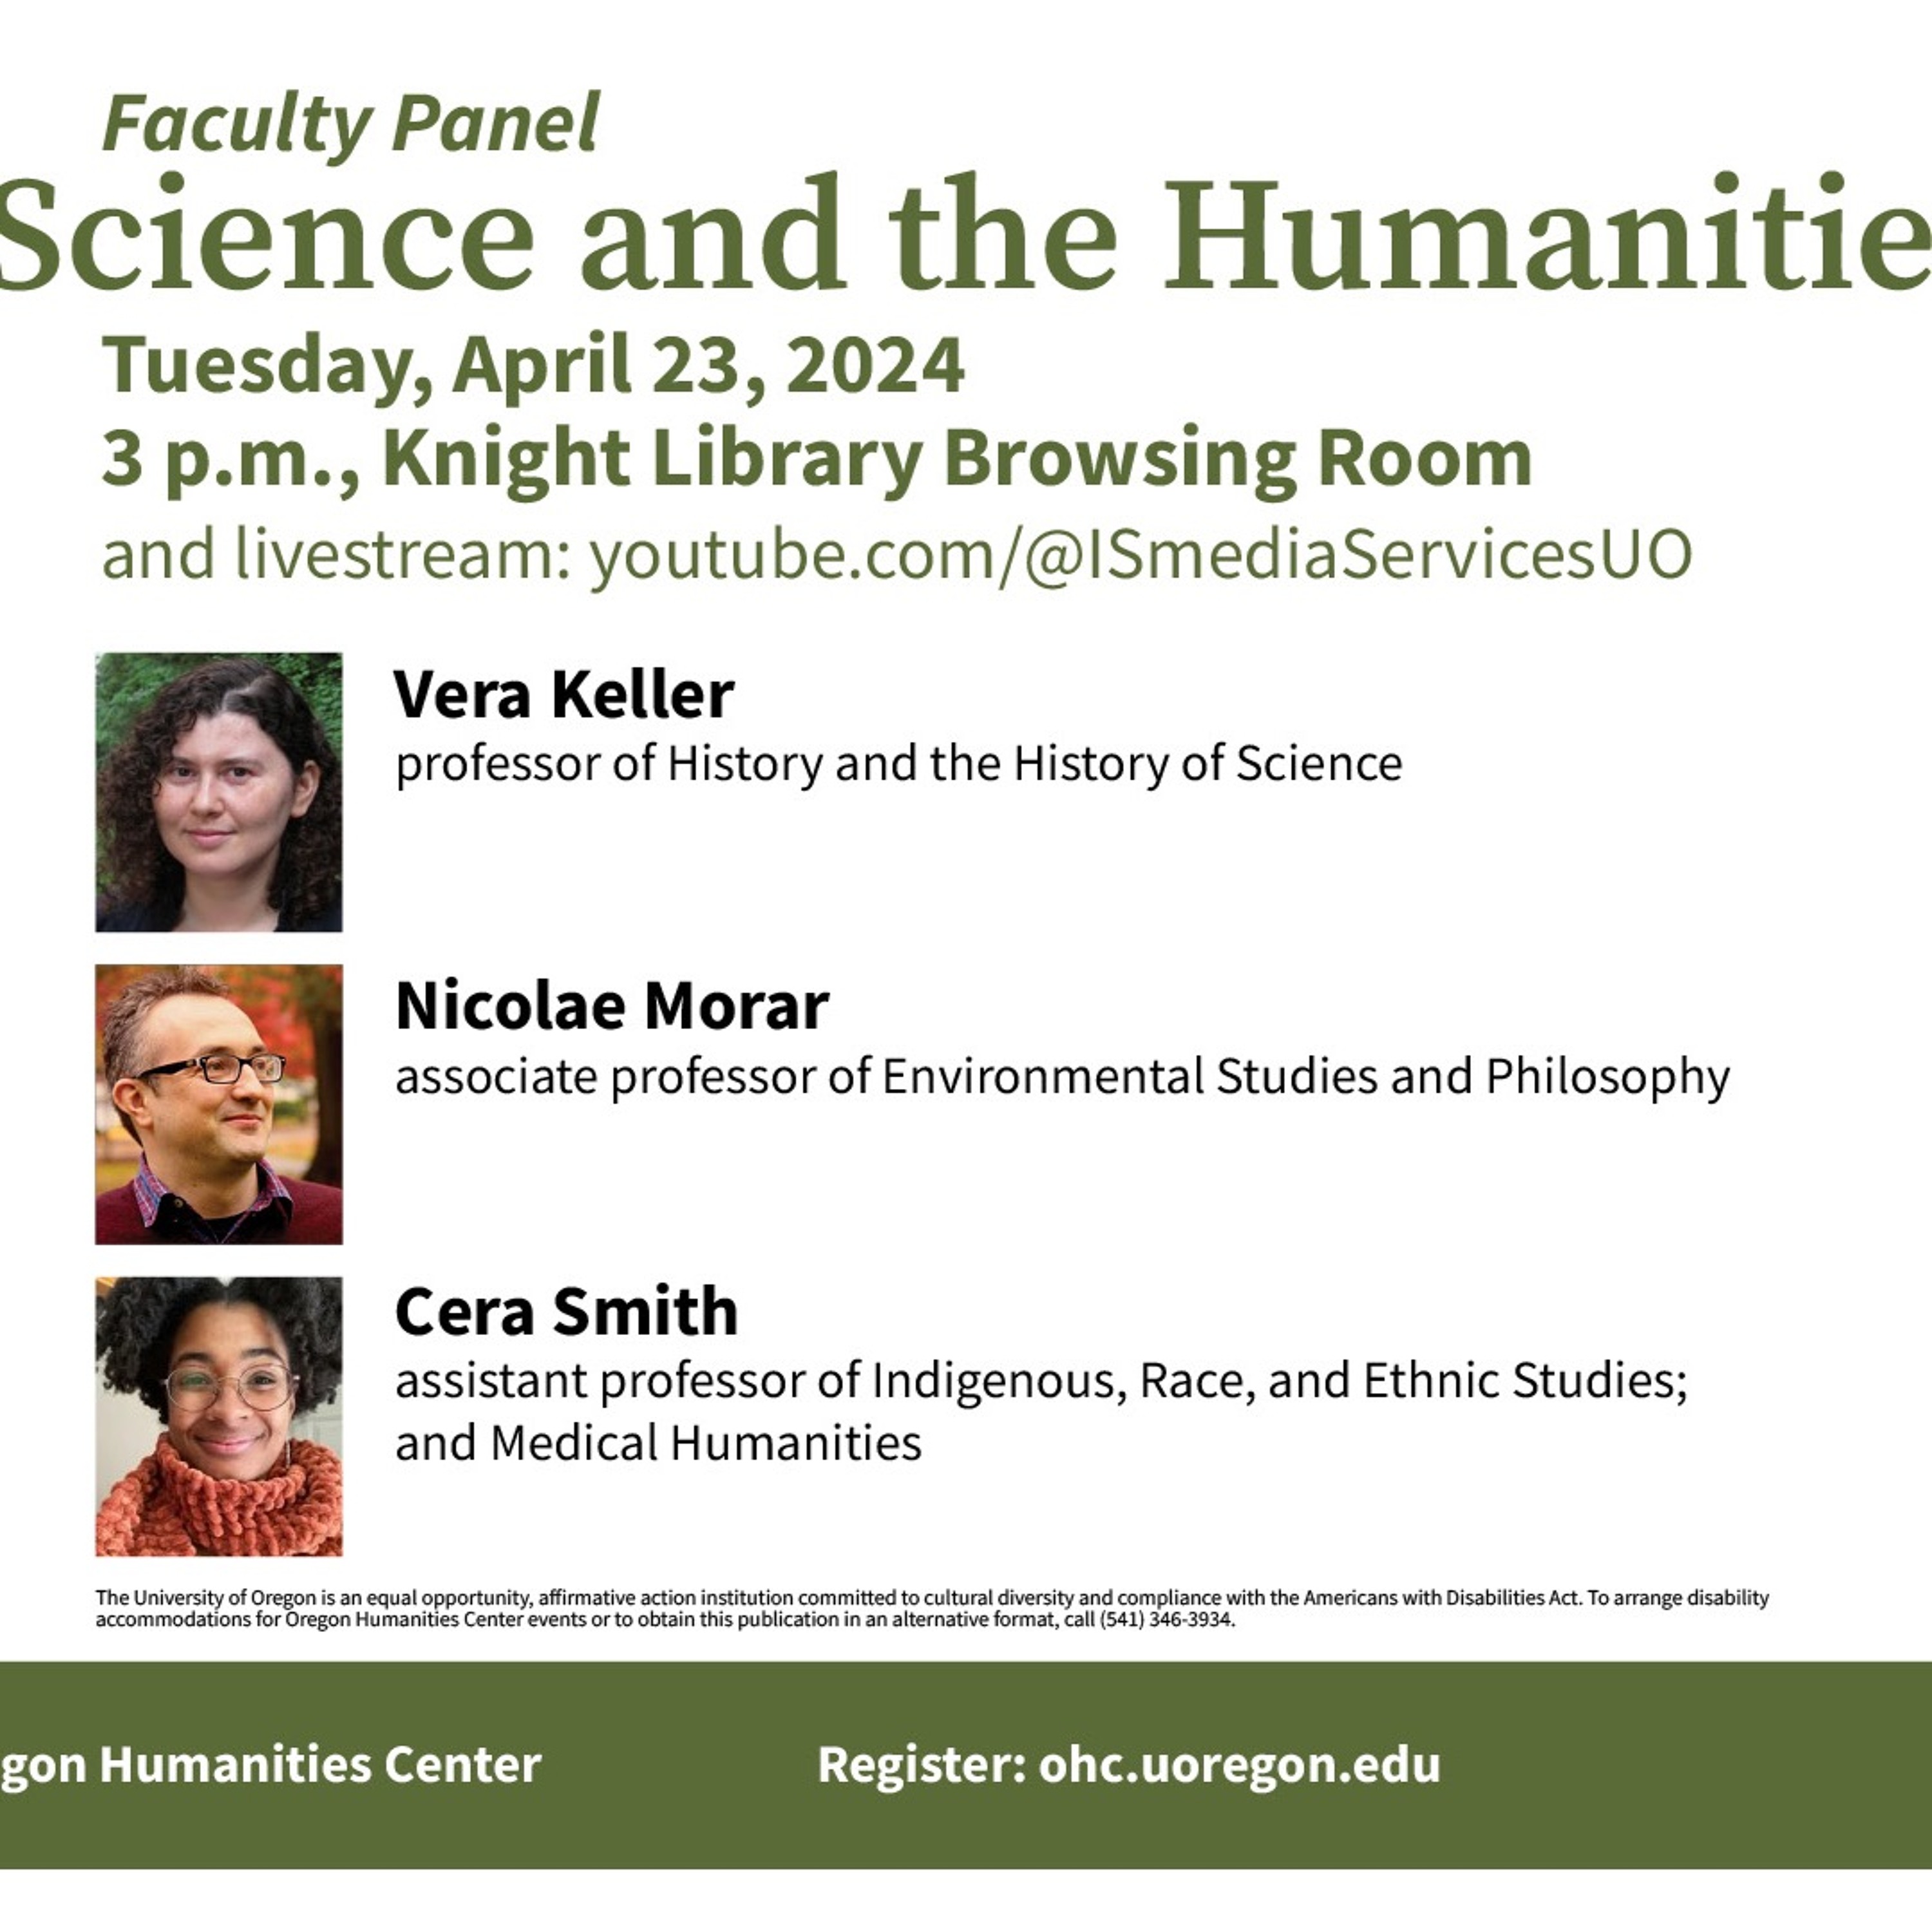 "Science and the Humanities" faculty panel